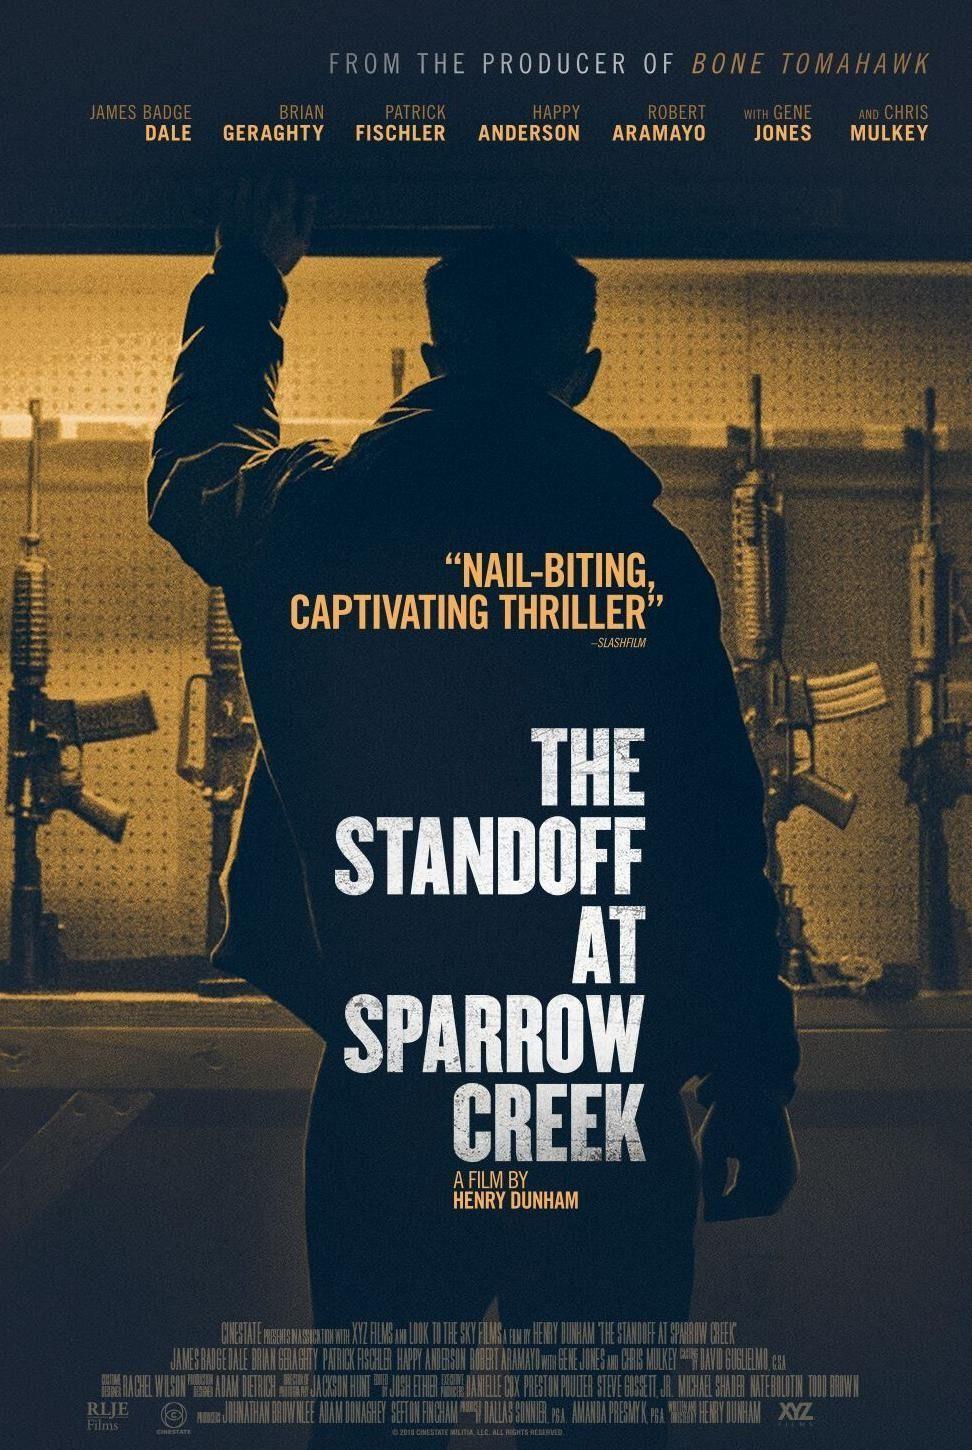 Return to the main poster page for The Standoff at Sparrow Creek